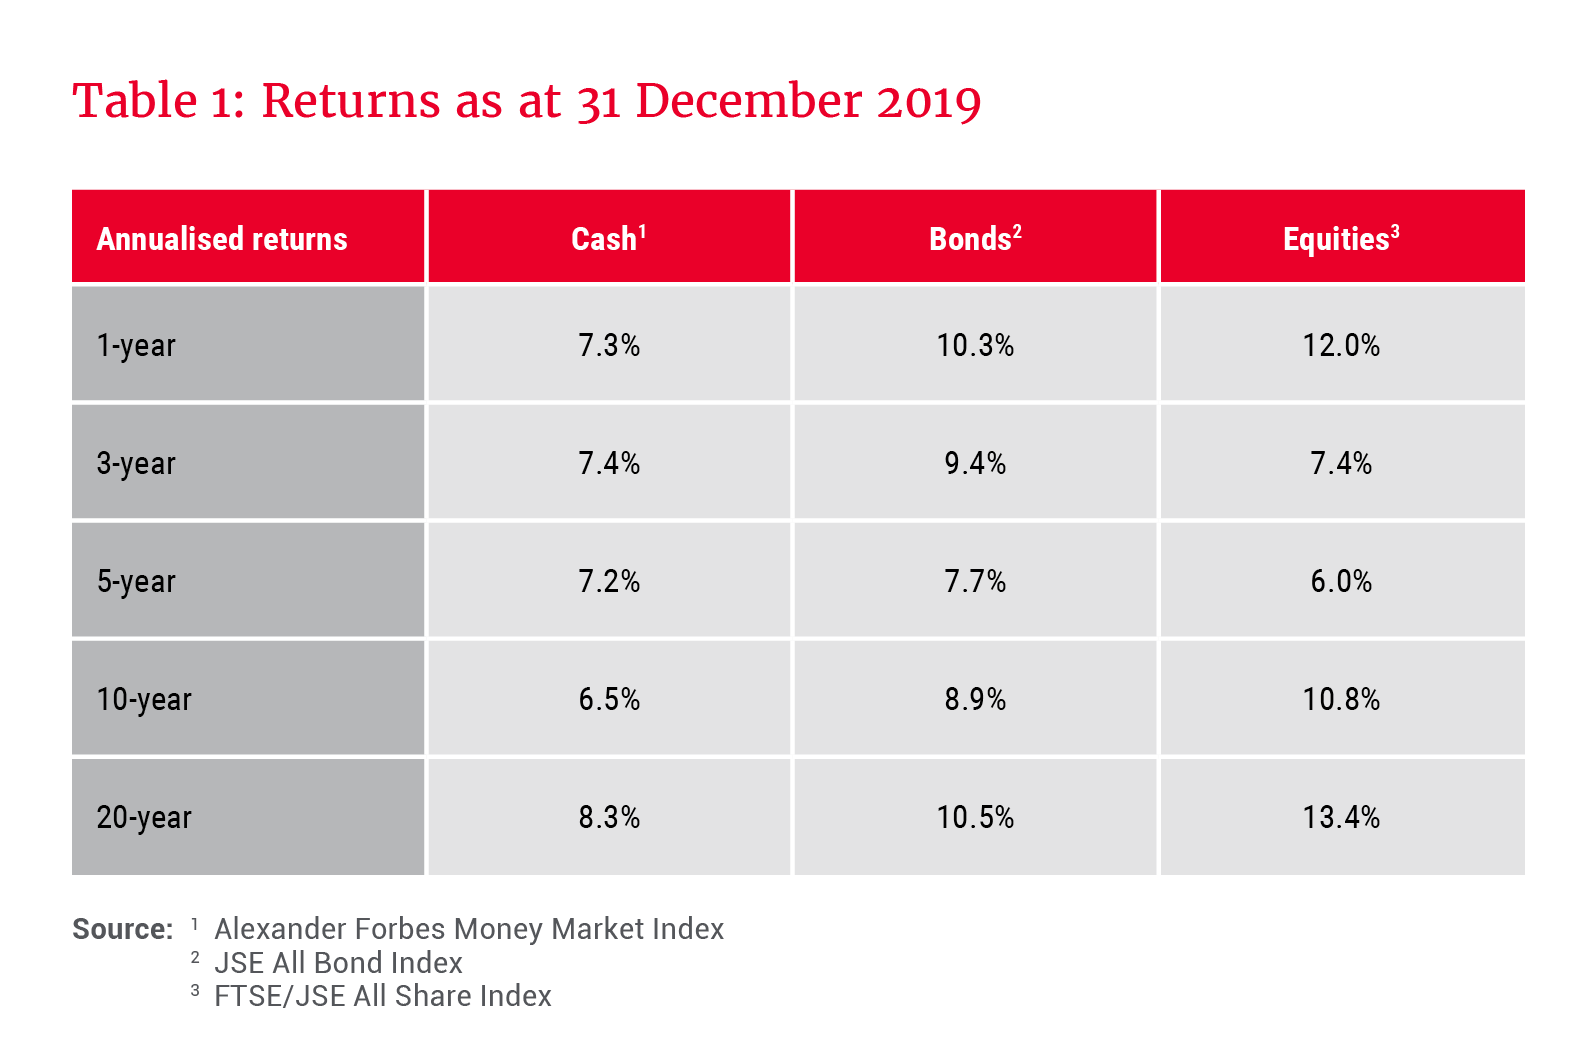 Cash, bond and equity returns as at 31 December 2019 - Allan Gray